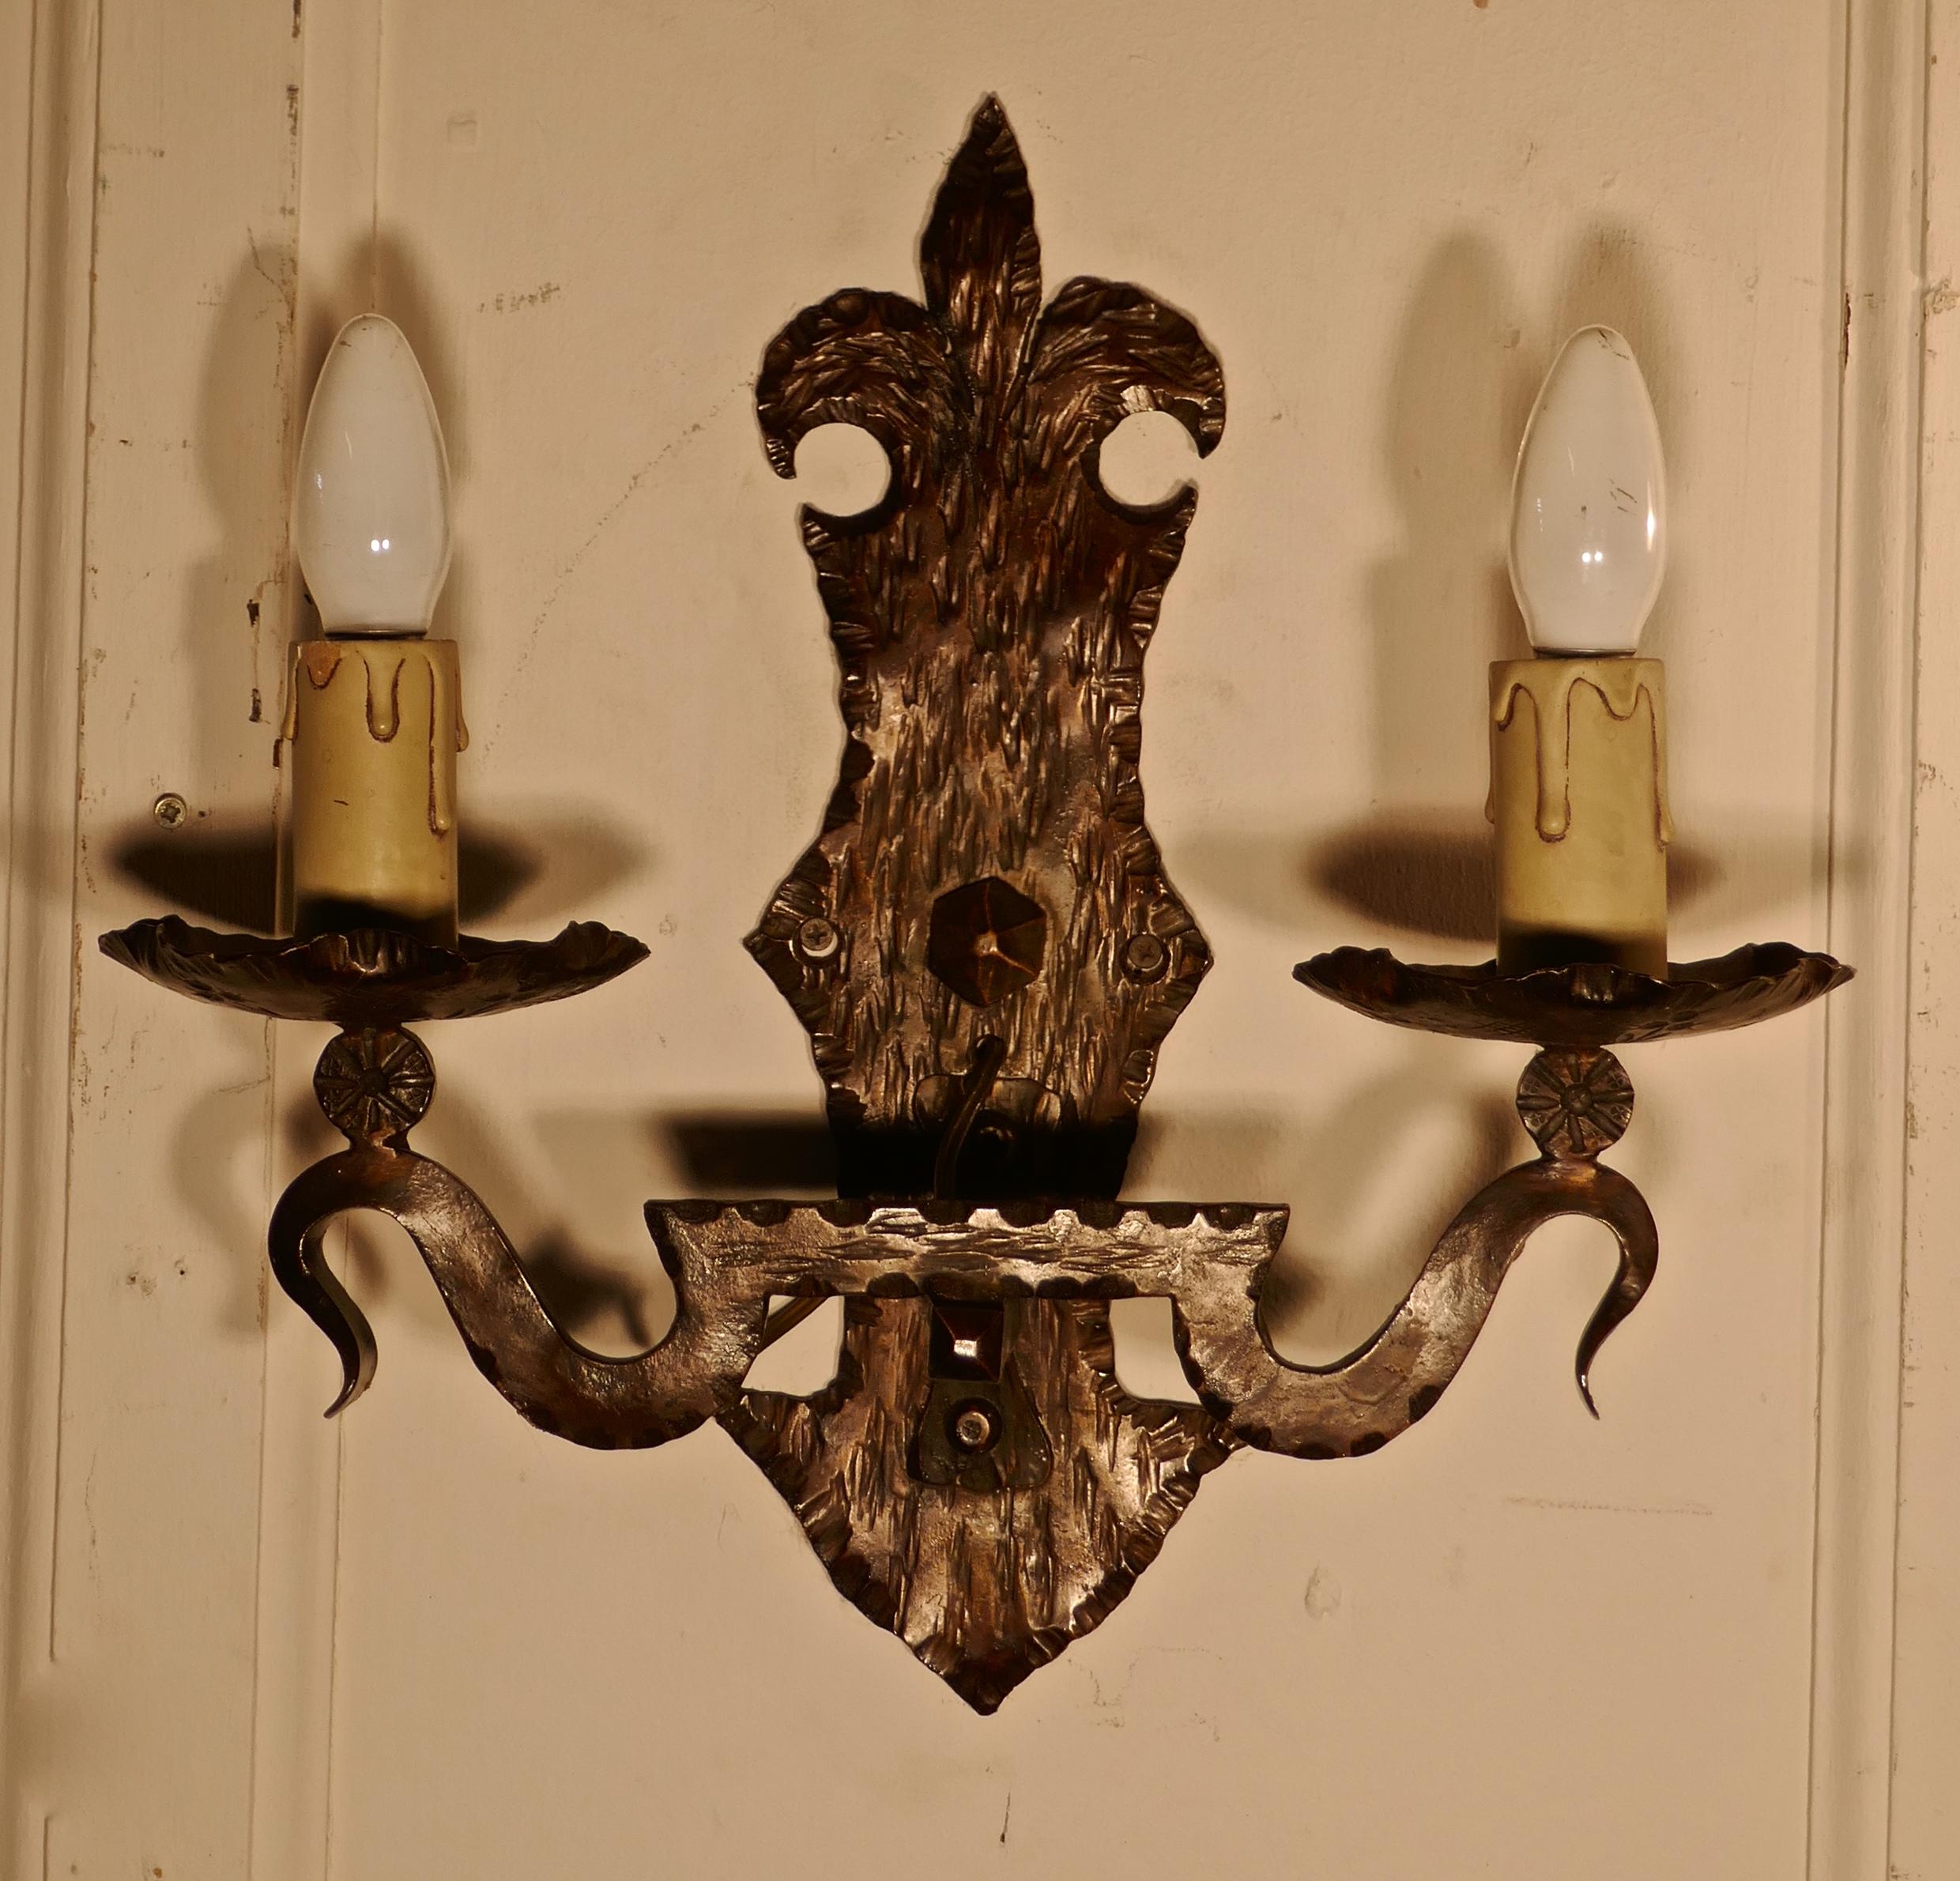 A superb pair of French Arts & Crafts Gothic iron wall lights. 

A very handsome pair of Heavy French Blacksmith made wall lights, the backplates are in the Bretton Arts & Crafts style and they each supports 2 sconces, the beaten iron has slight